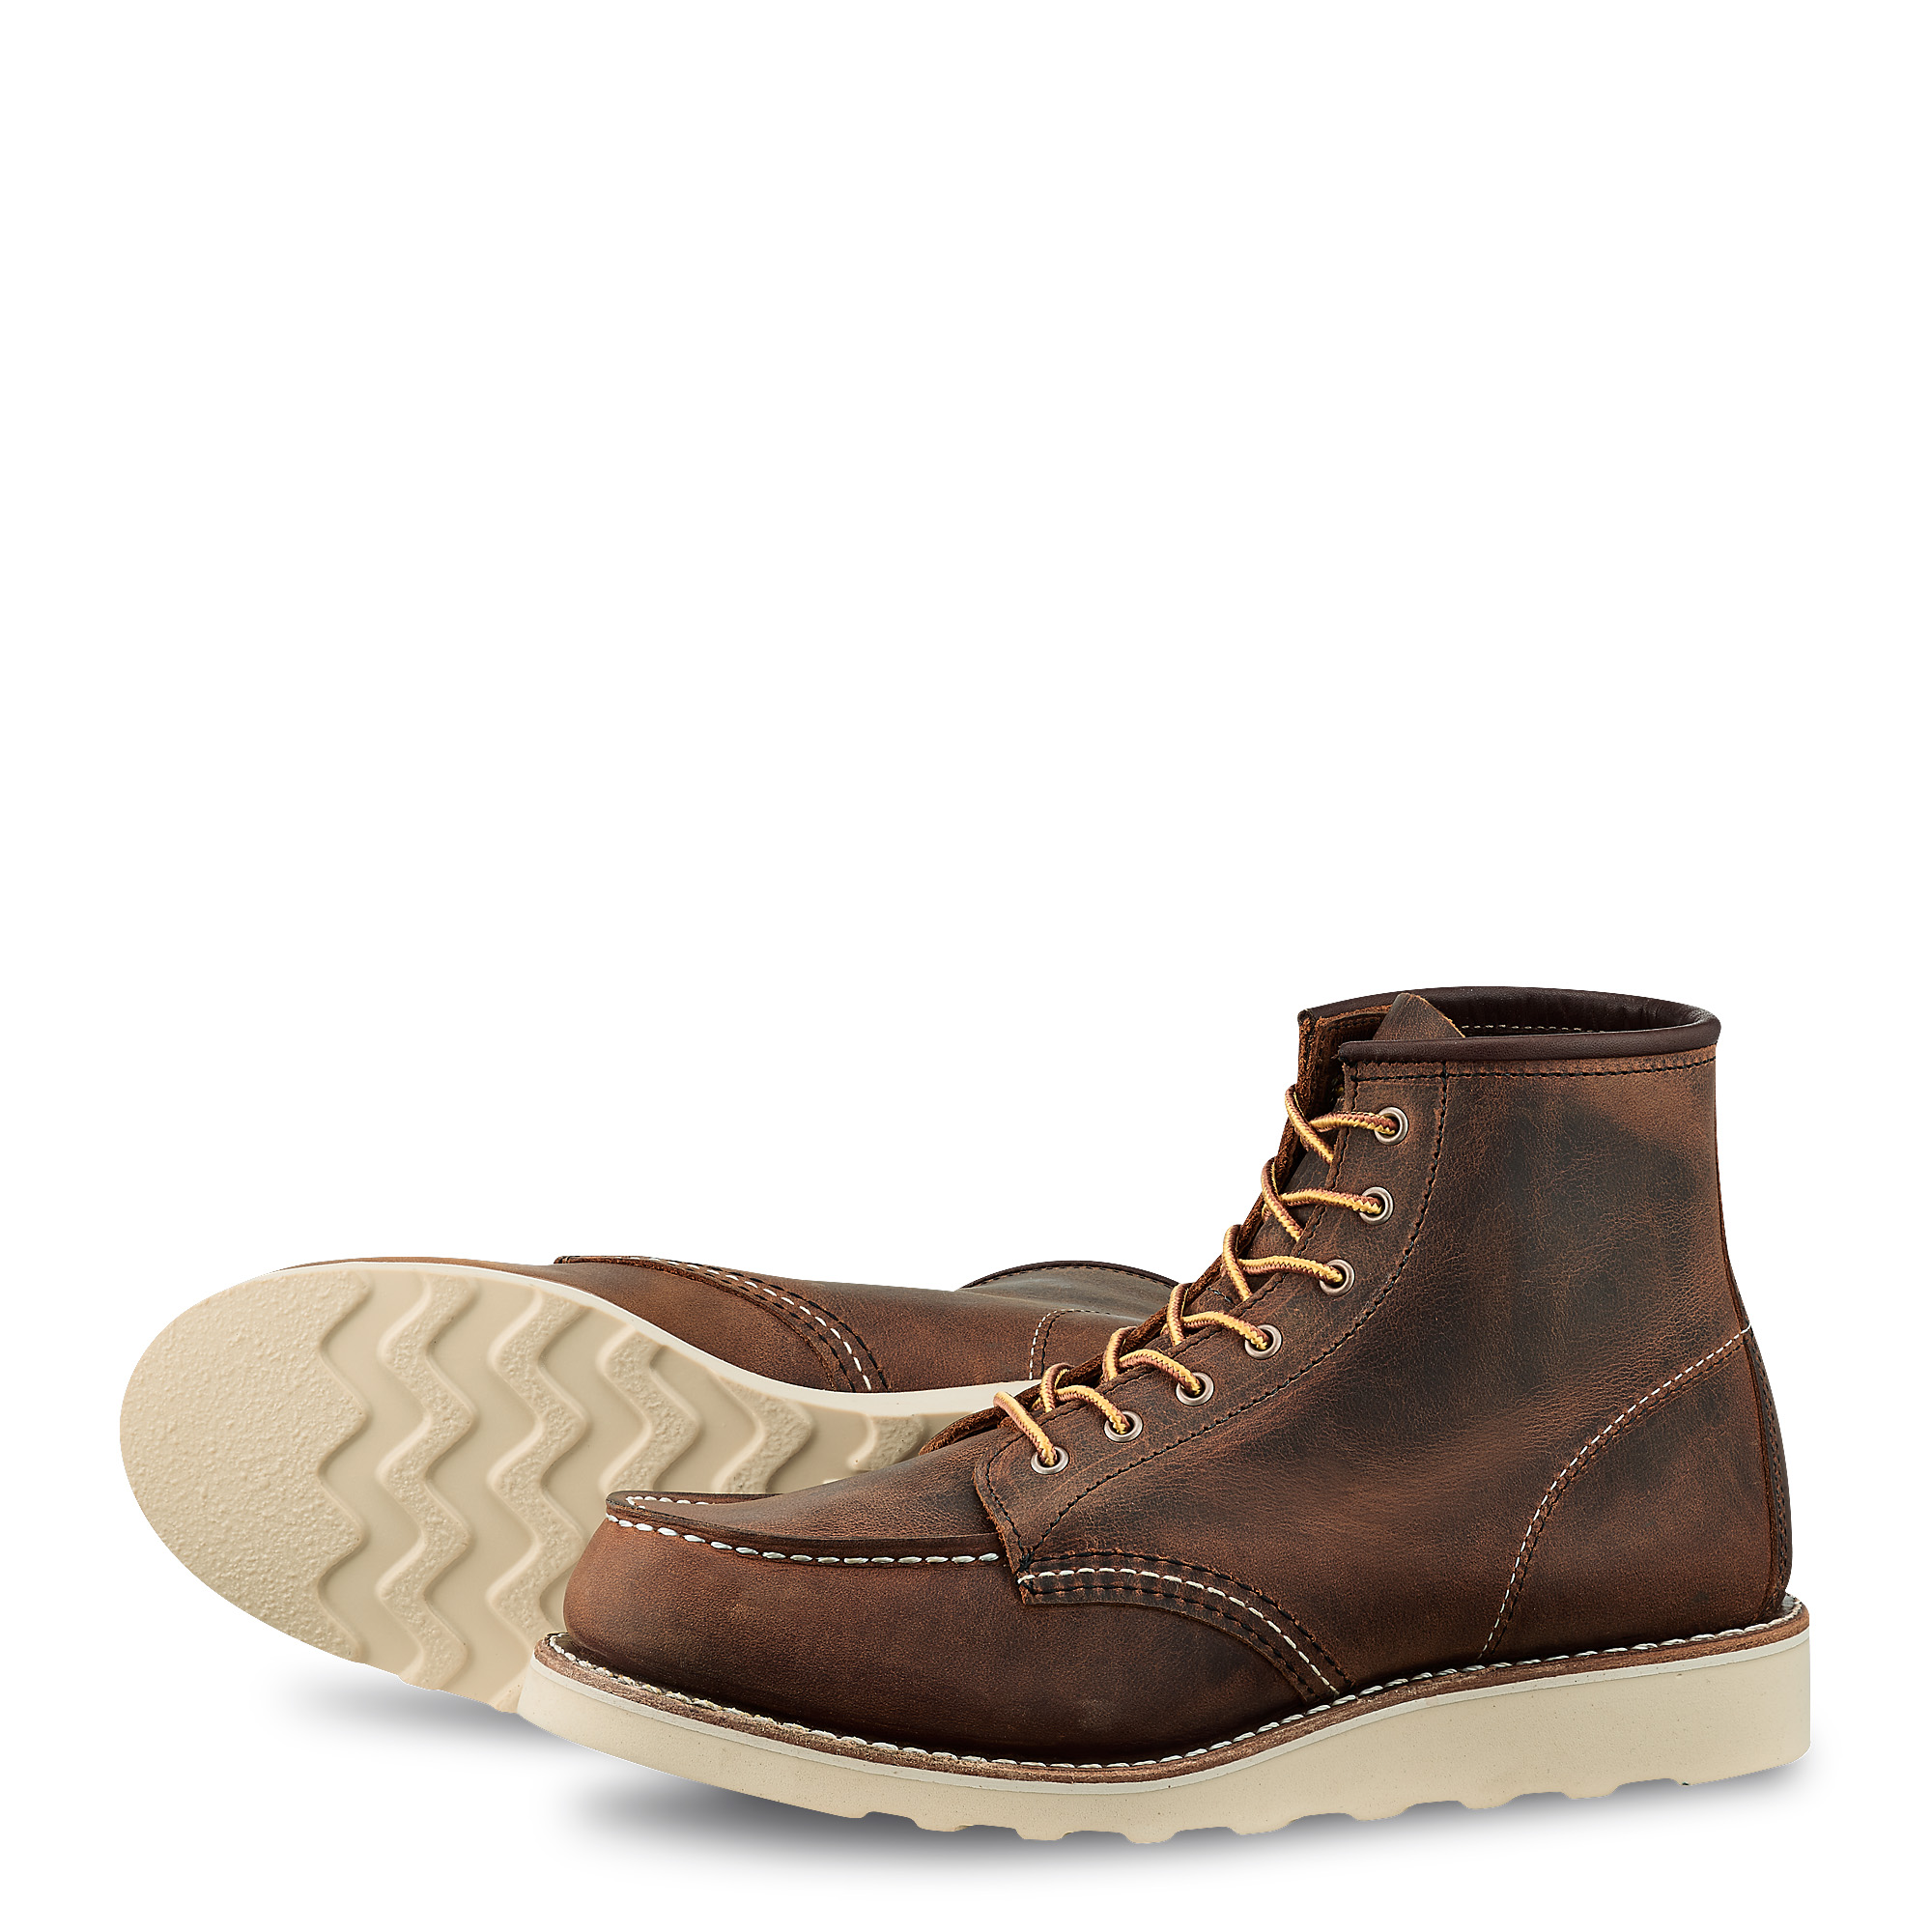 3428 Moc Toe Red Wing Store